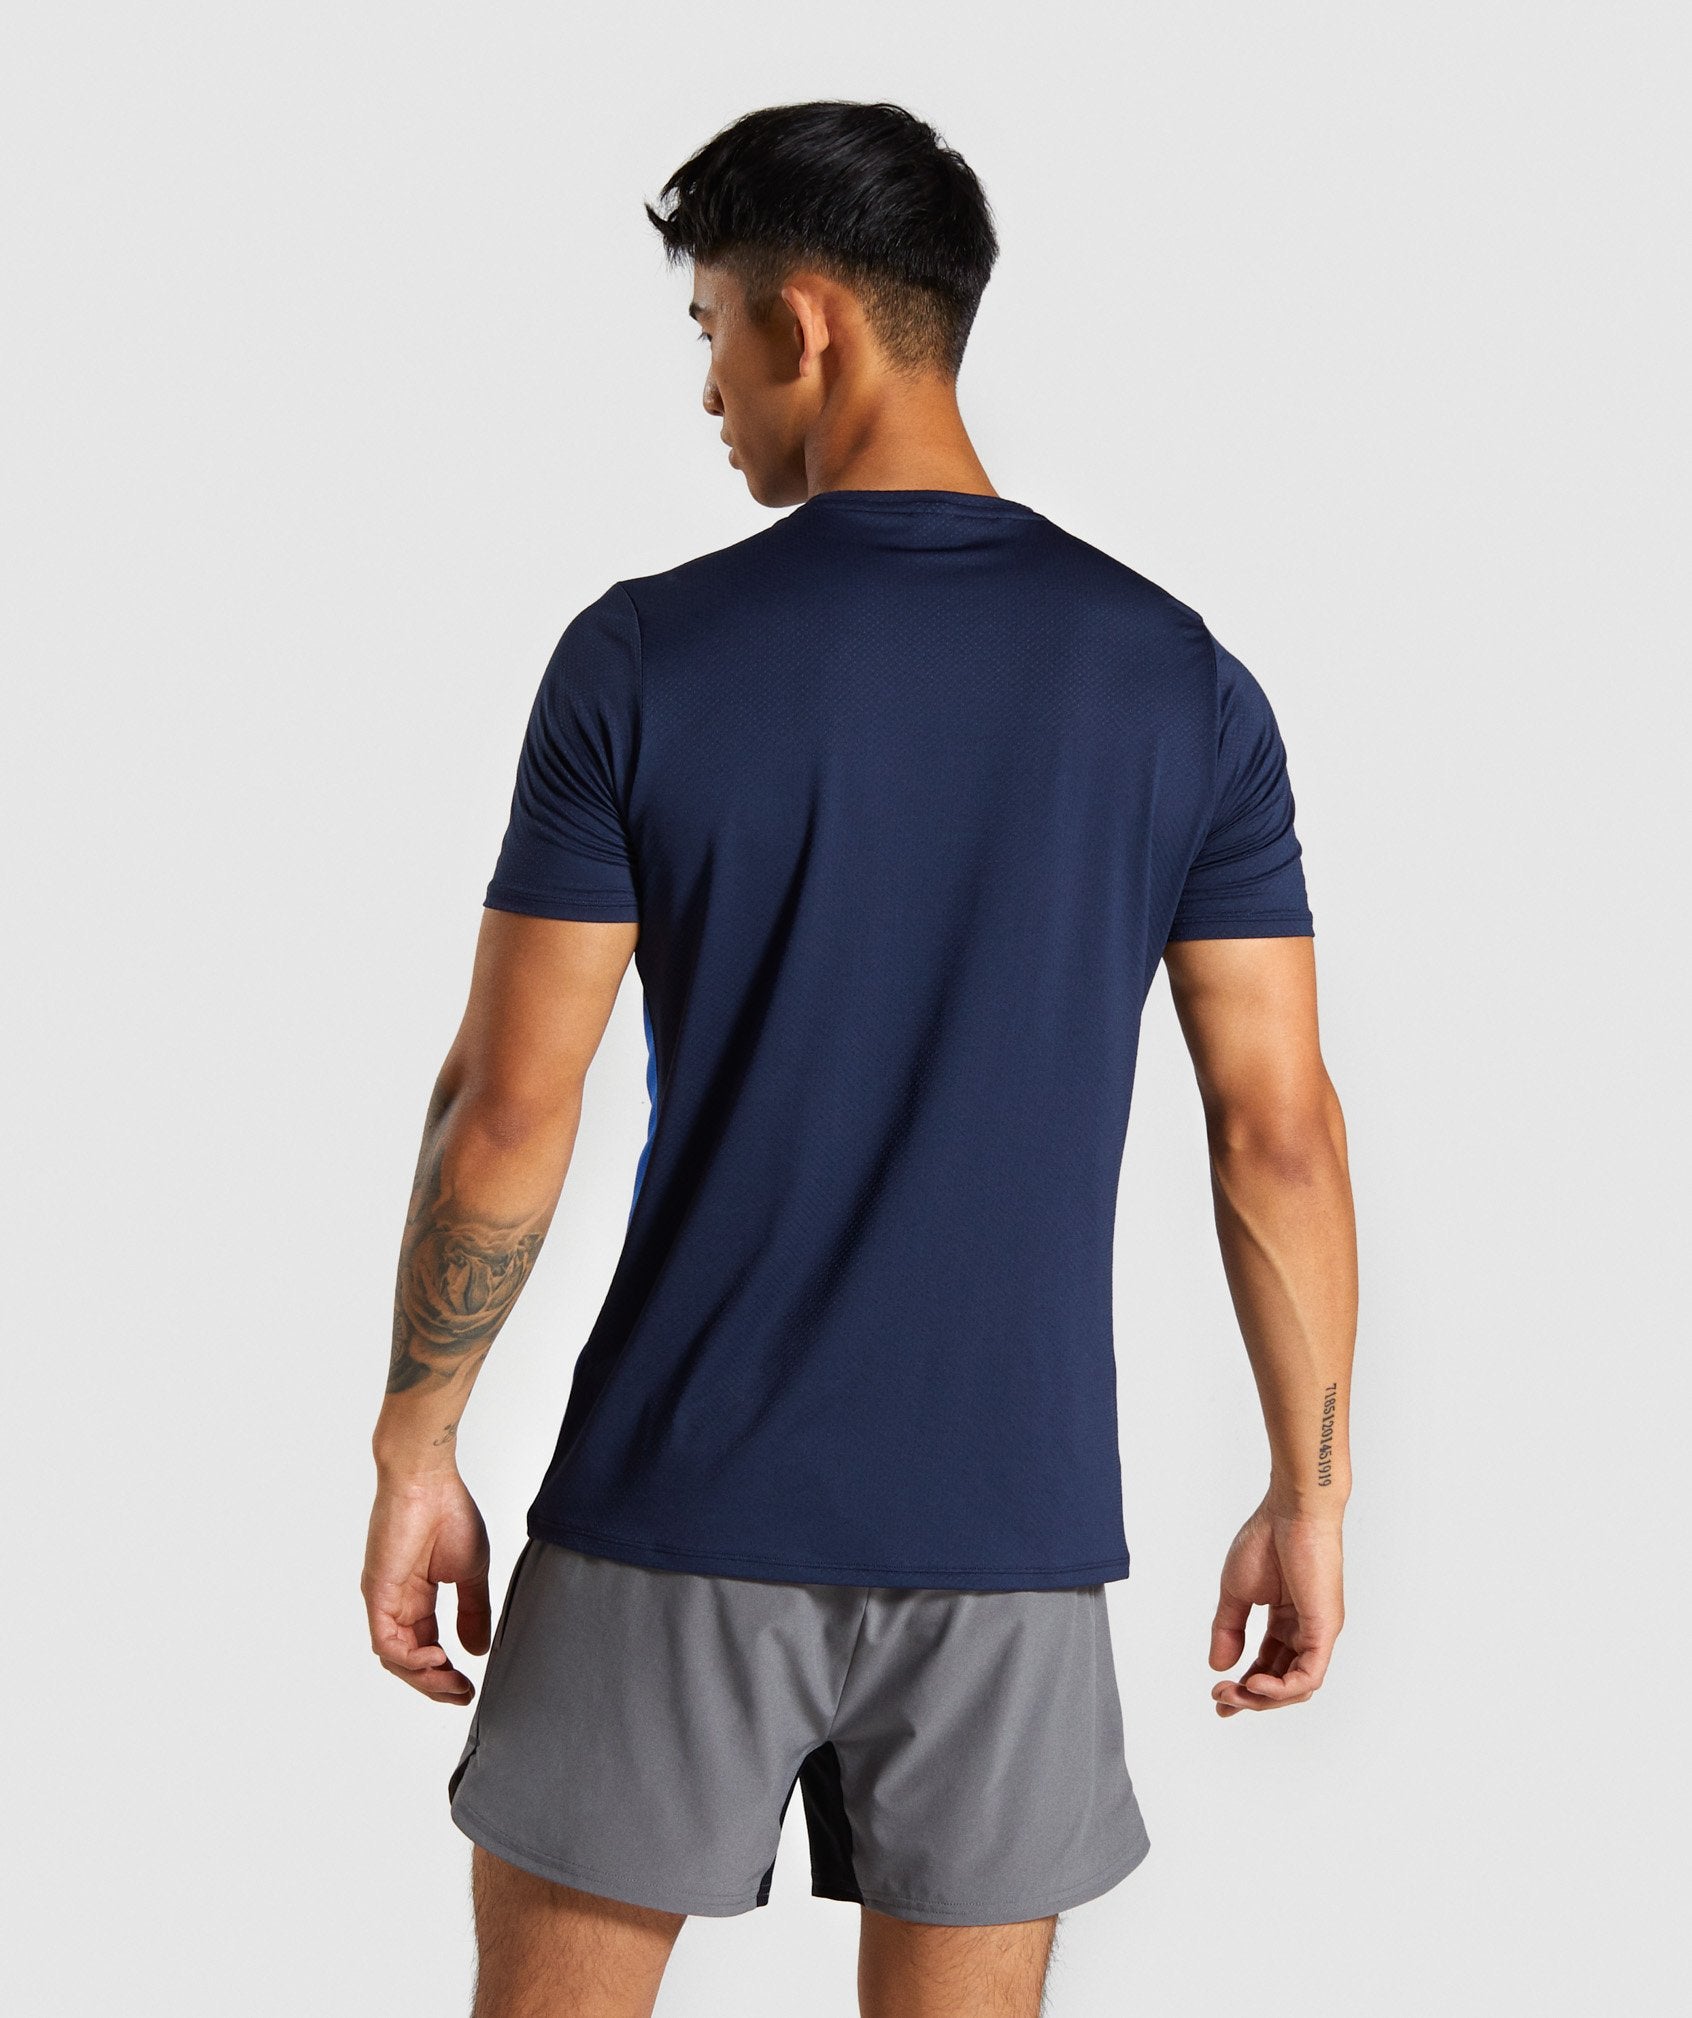 Speed T-Shirt in Blue - view 2